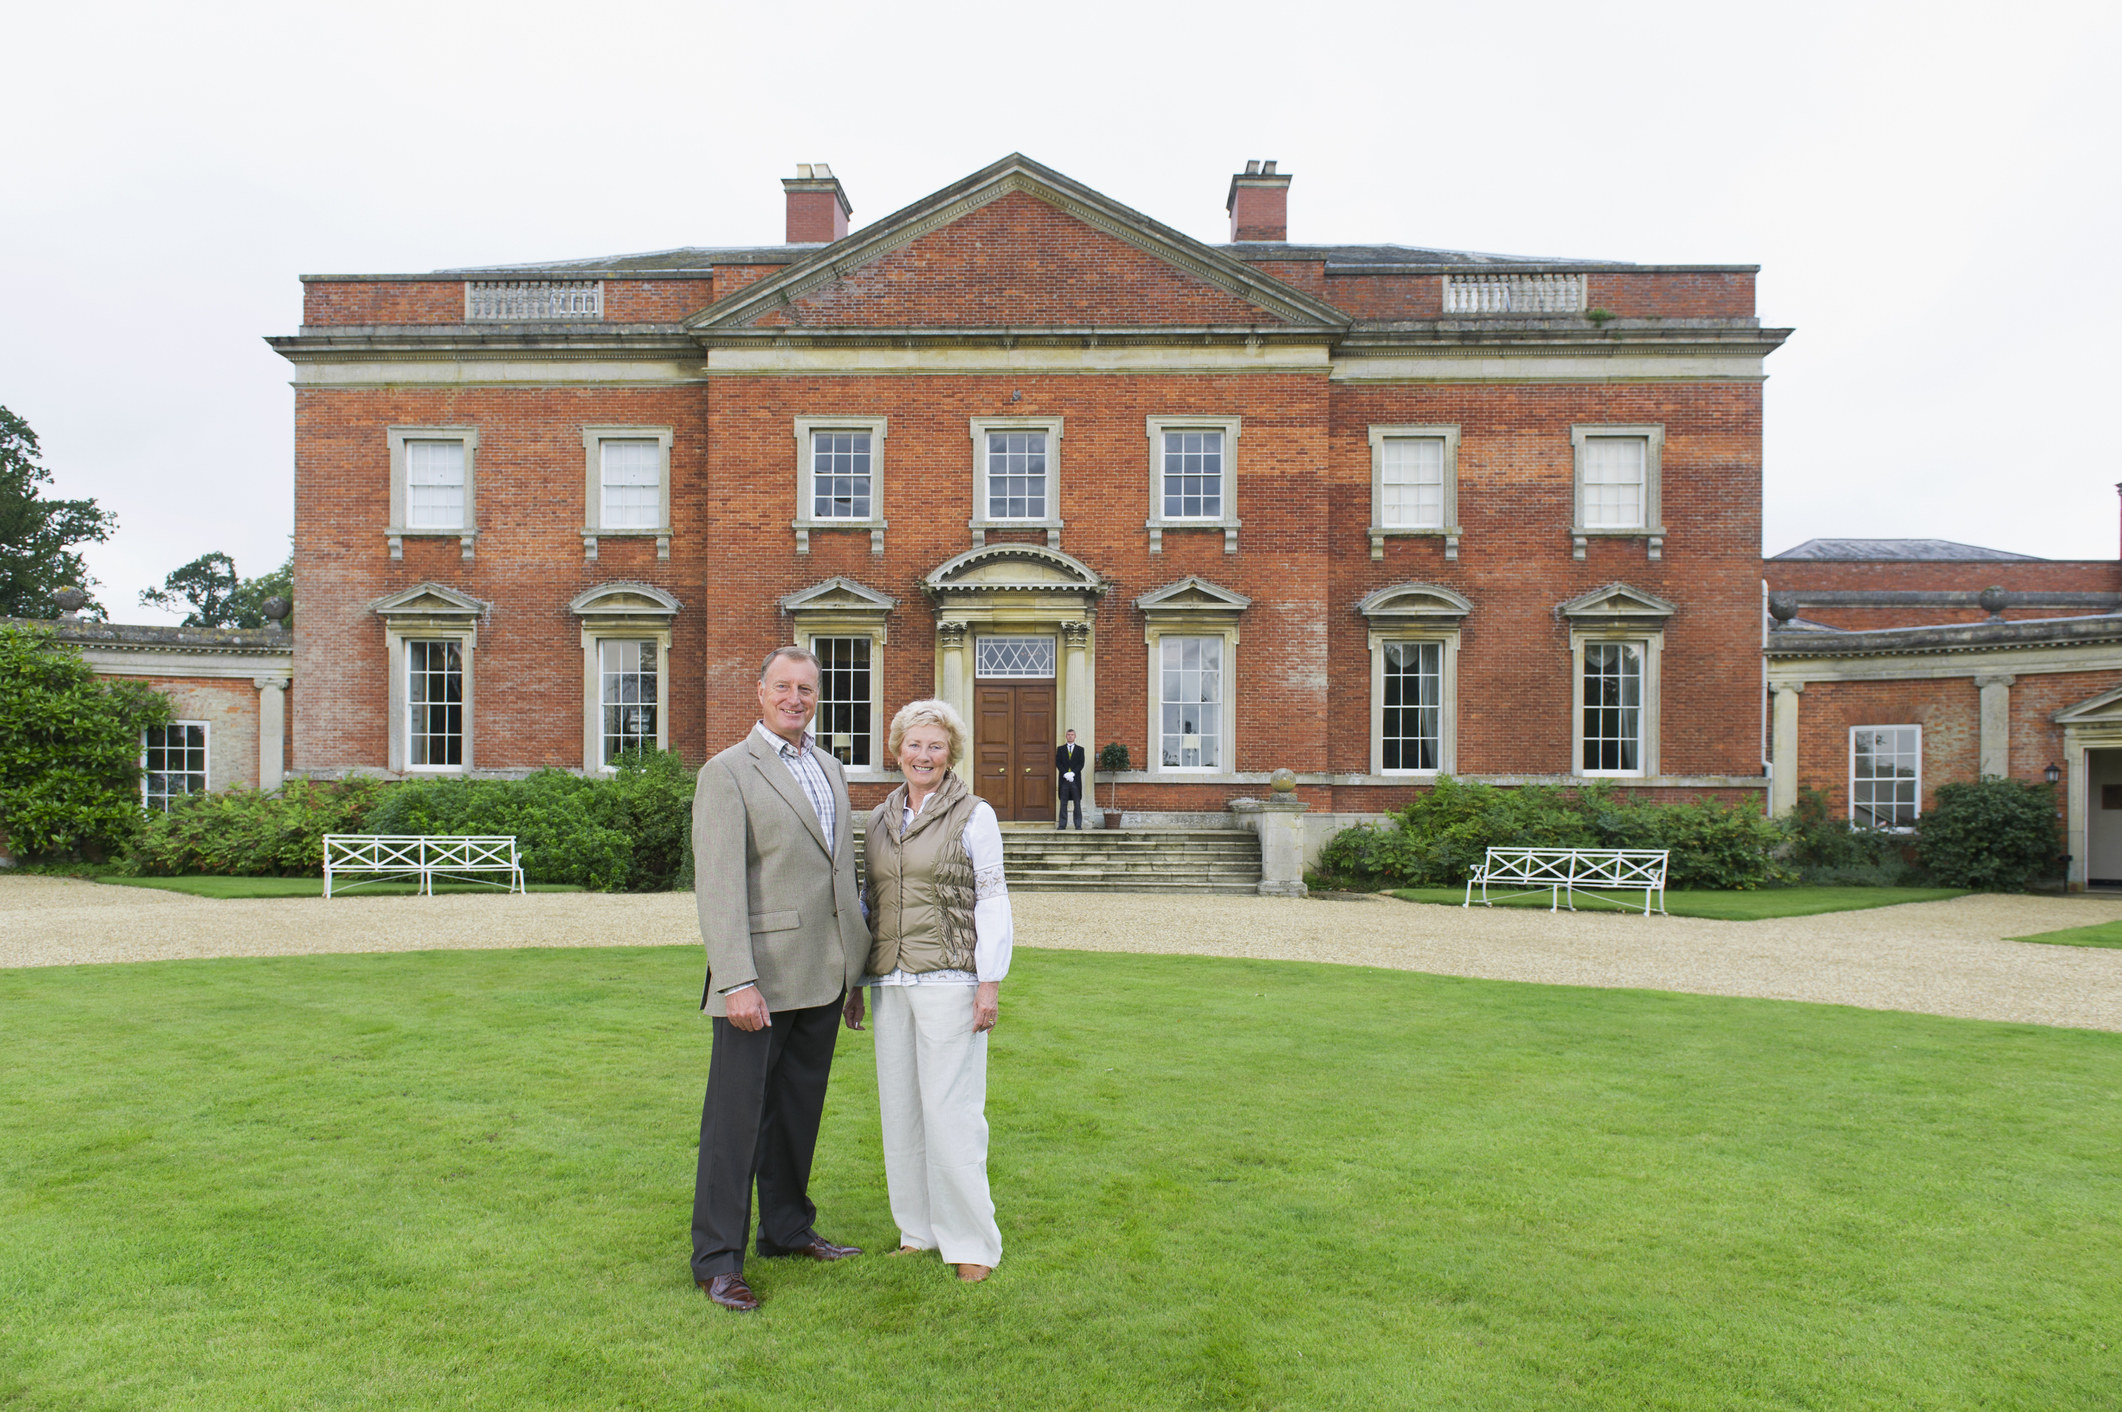 A couple in front of lavish estate